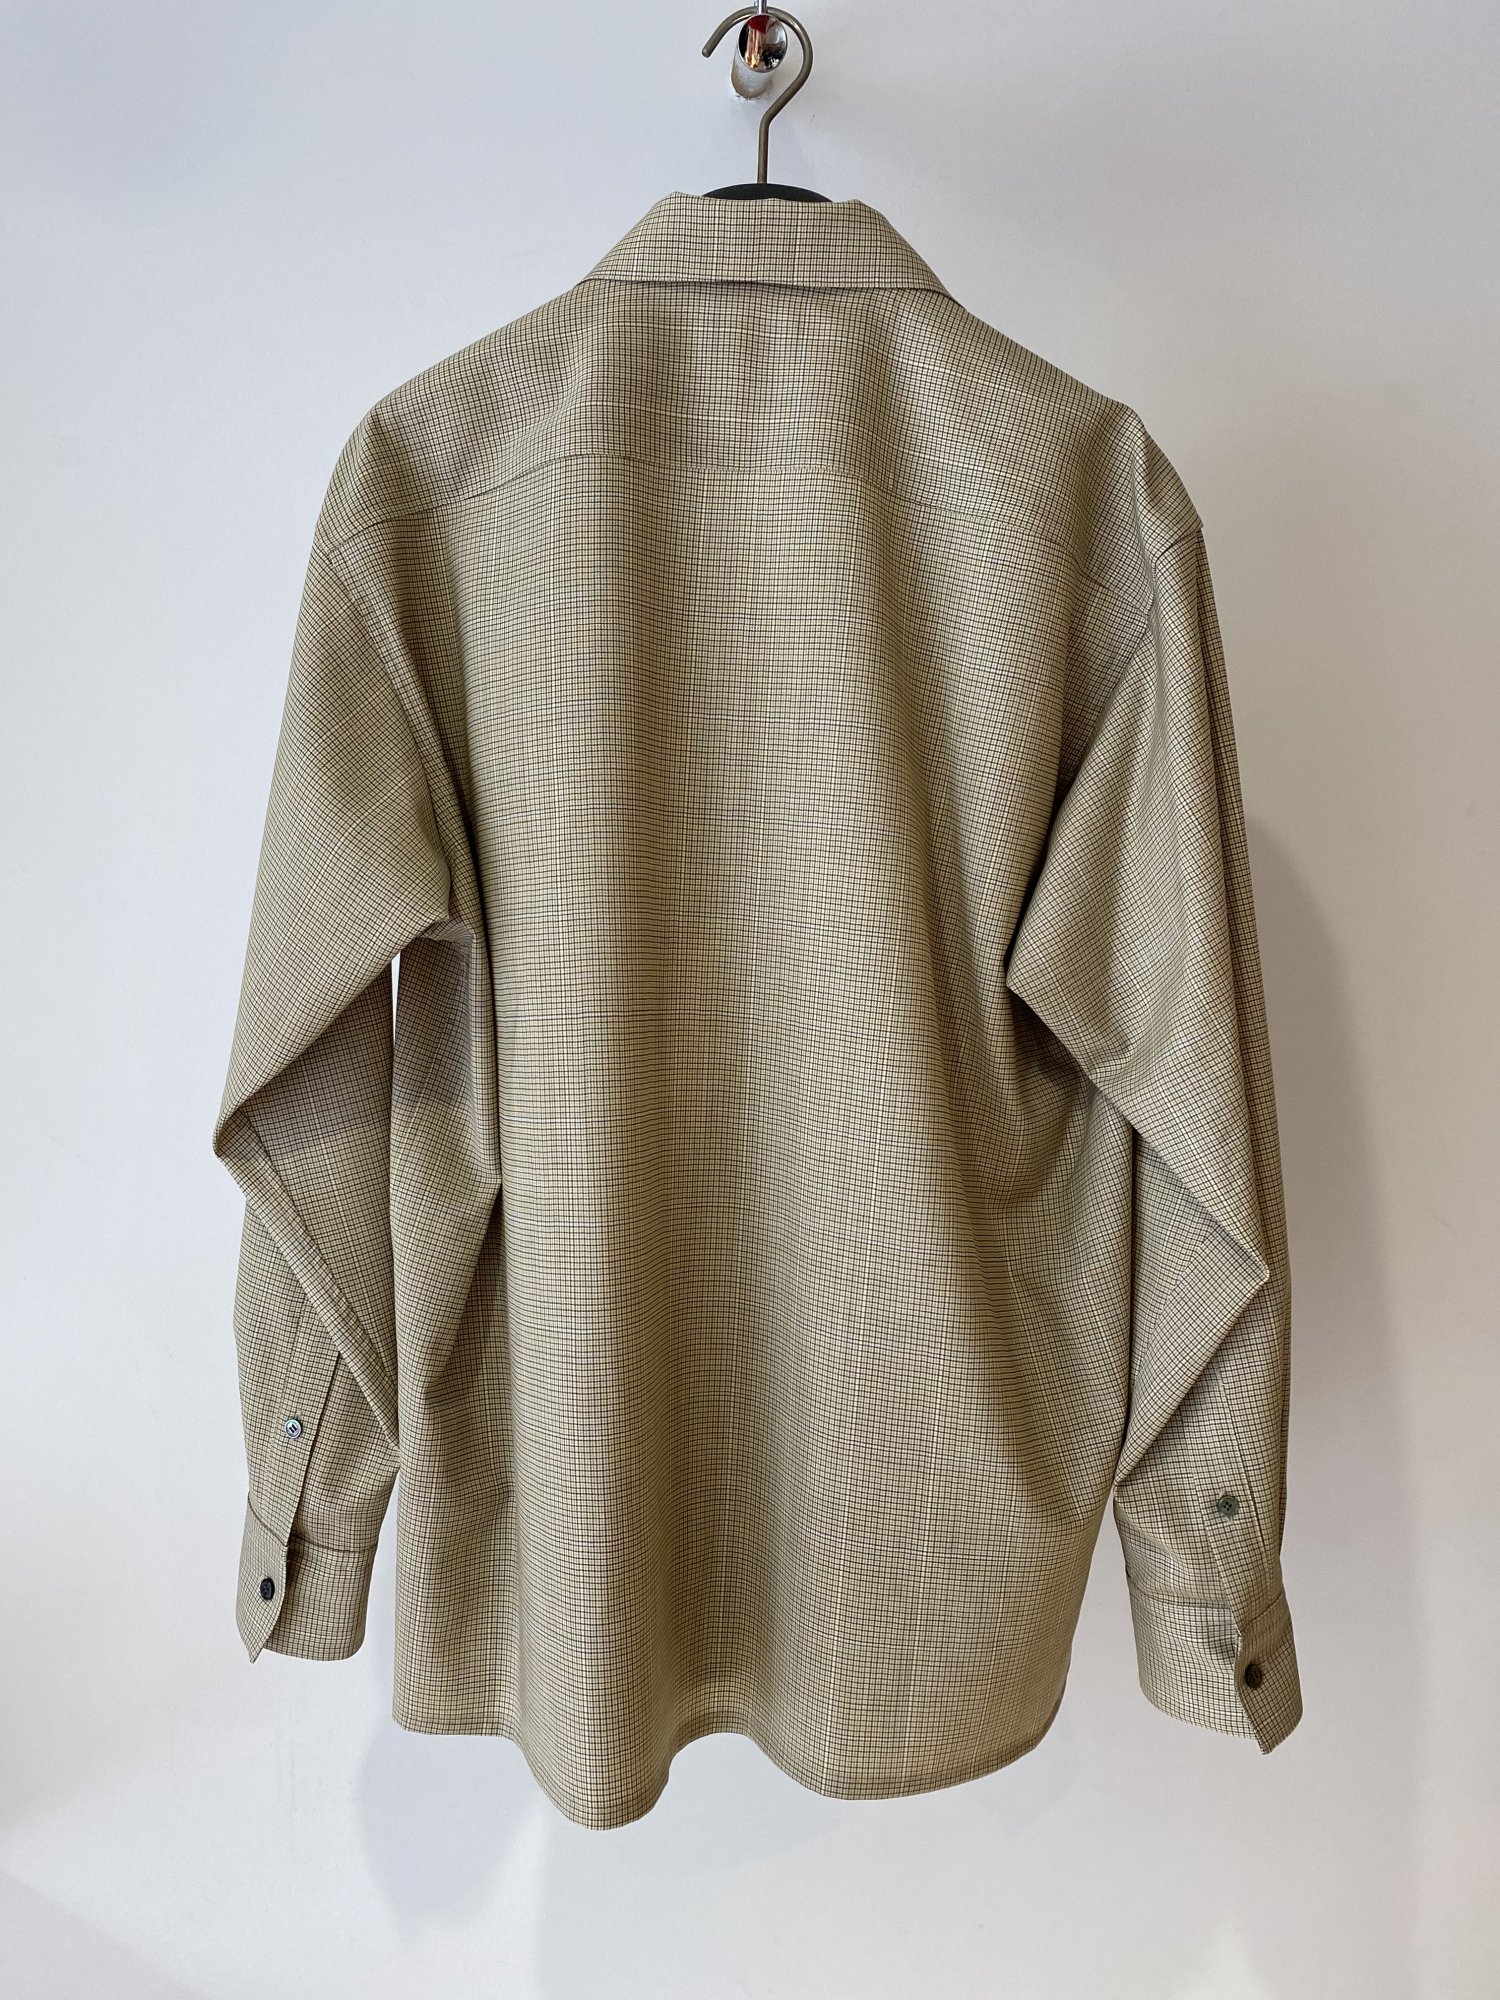 LITTLEBIG<br />Wool Checked L/S SH / Beige<img class='new_mark_img2' src='https://img.shop-pro.jp/img/new/icons14.gif' style='border:none;display:inline;margin:0px;padding:0px;width:auto;' />